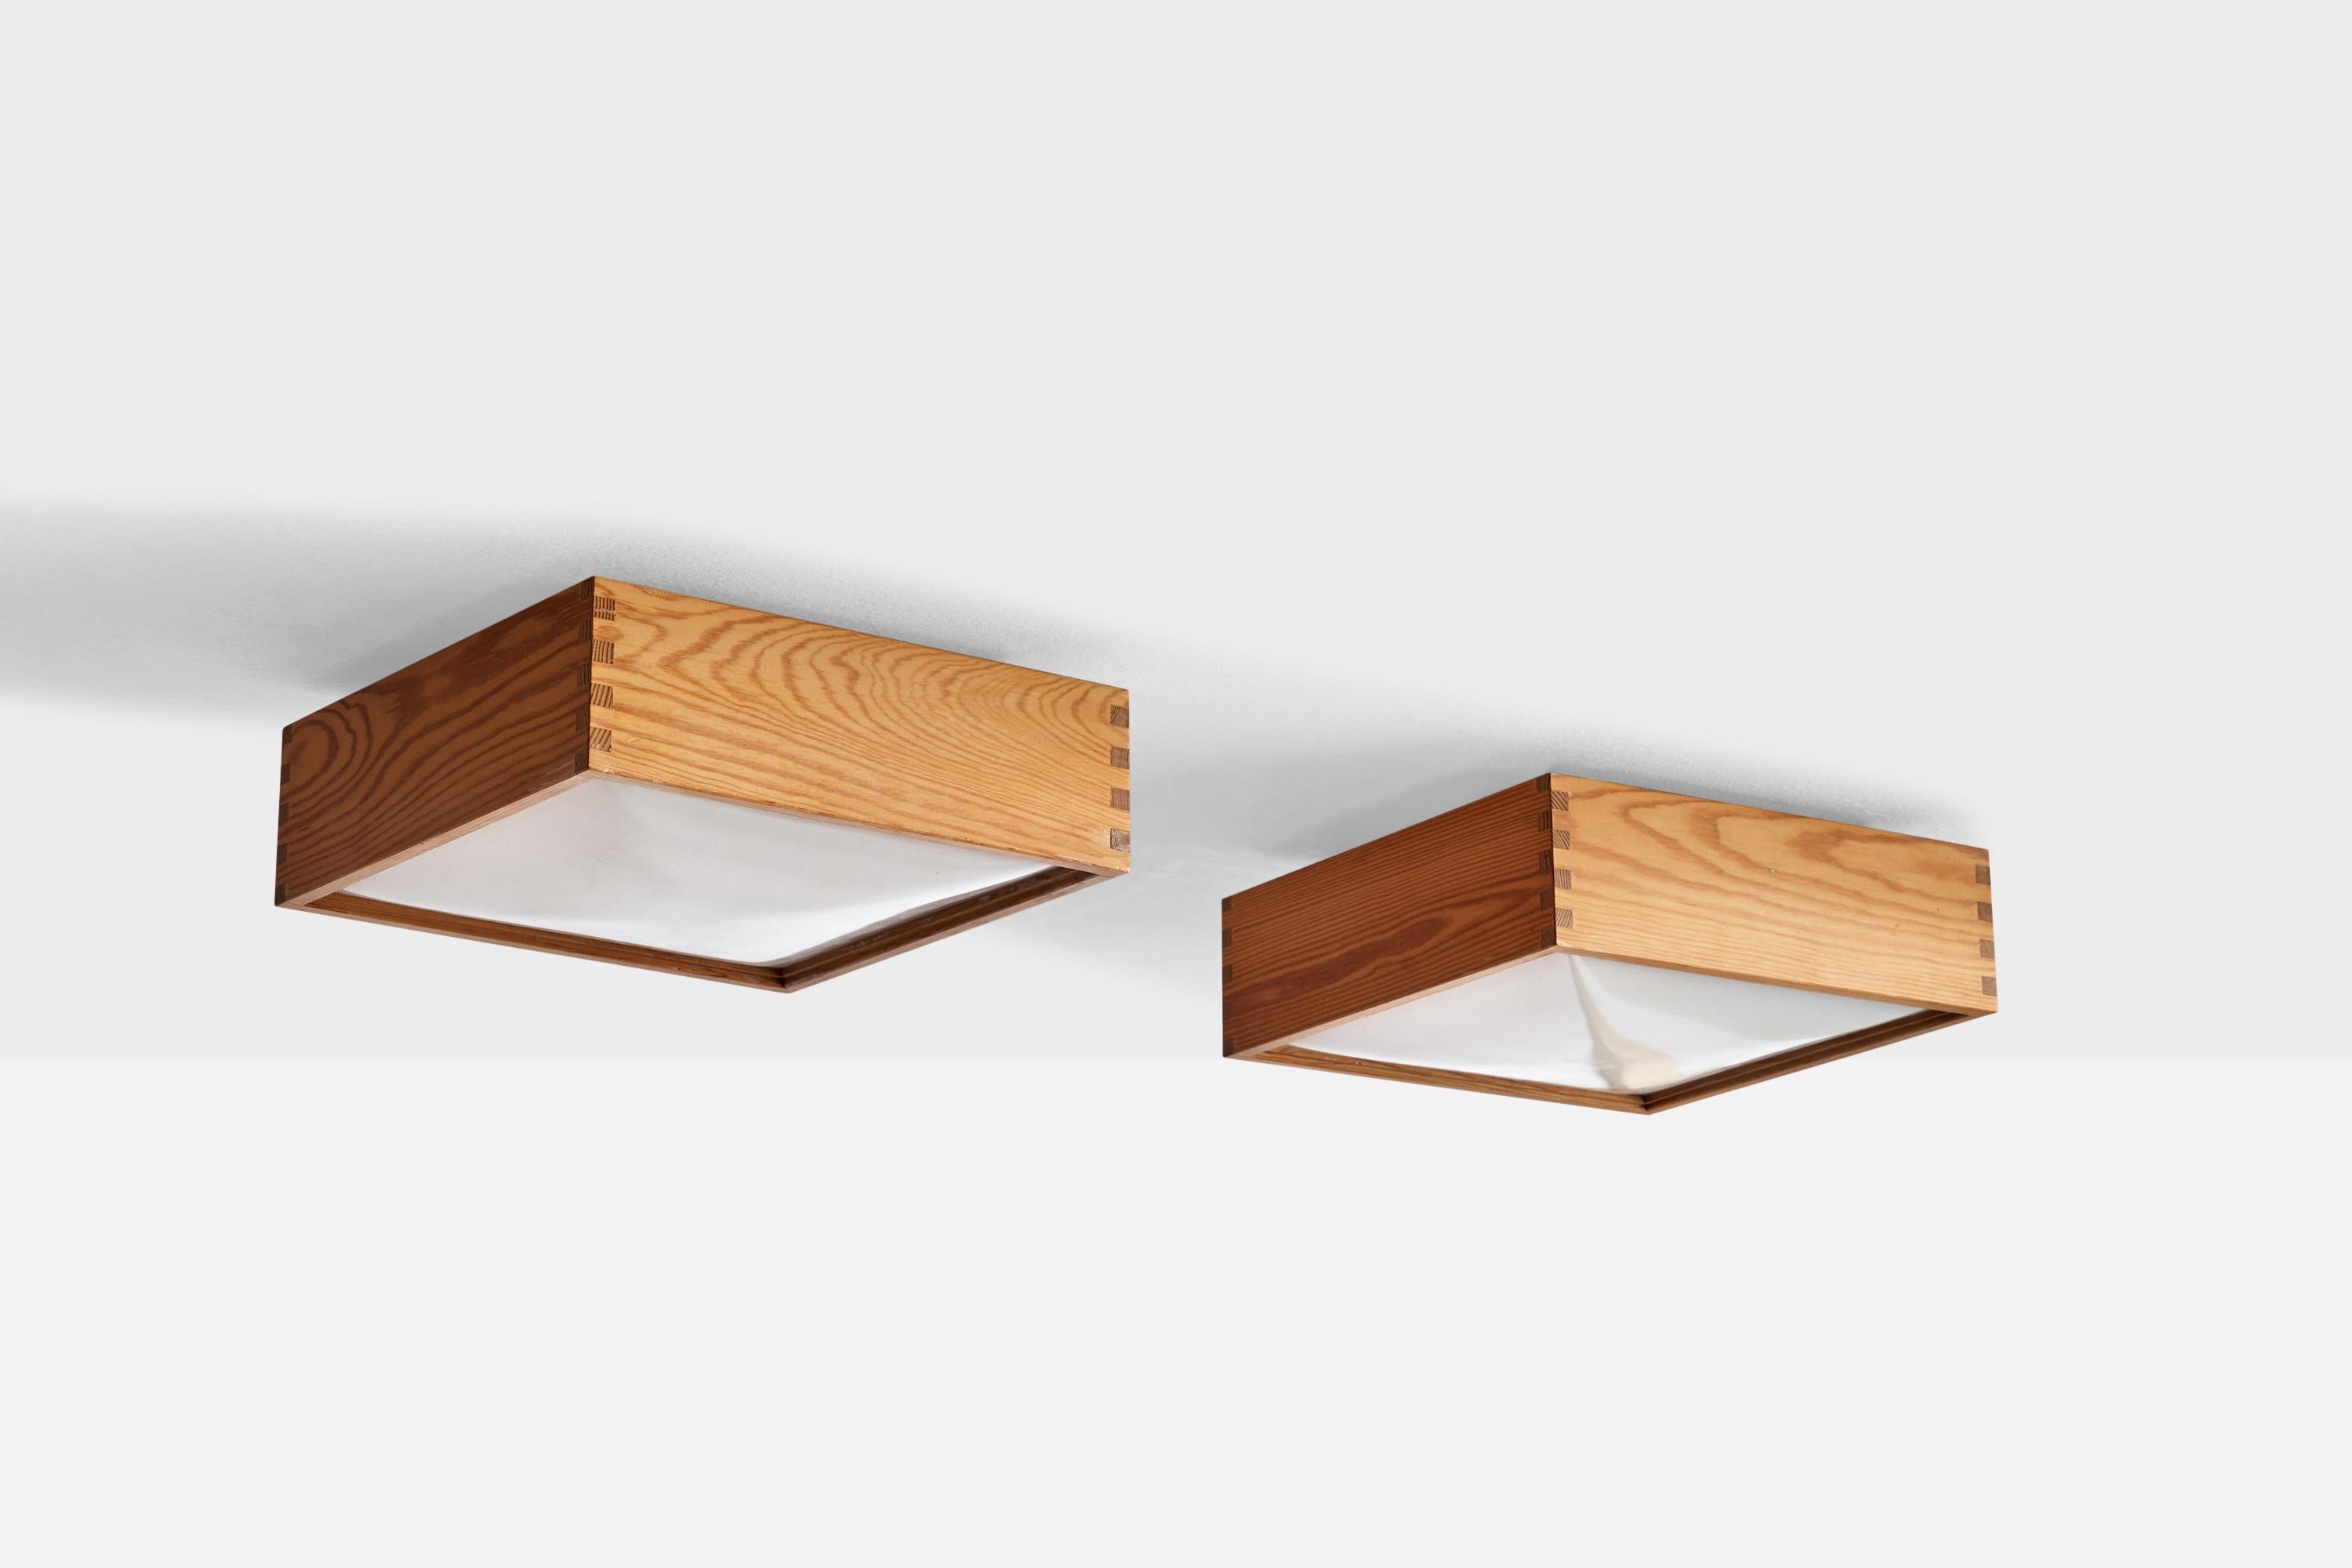 A pair of pine and acrylic flush mounts designed by Uno & Östen Kristiansson and produced by Luxus, Vittsjö, Sweden, c. 1970s.

Overall Dimensions (inches): 3.75”  H x 11.75” W x 11.75” D
Back Plate Dimensions (inches): 8” H x 8.75” W x .50”  D
Bulb